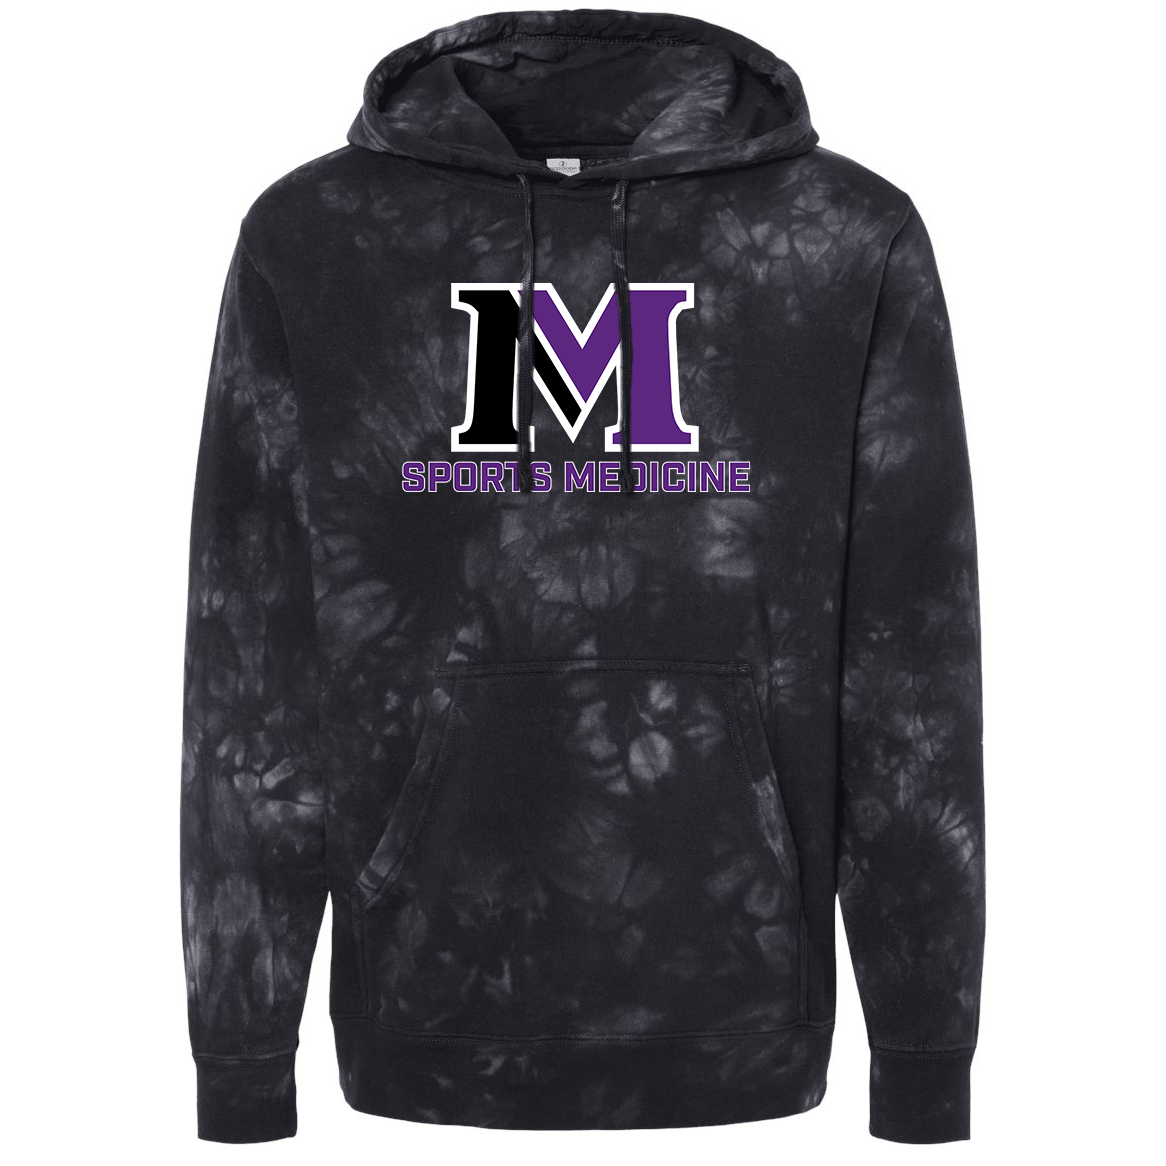 Masters School Independent Trading Co. Pigment-Dyed Hooded Sweatshirt